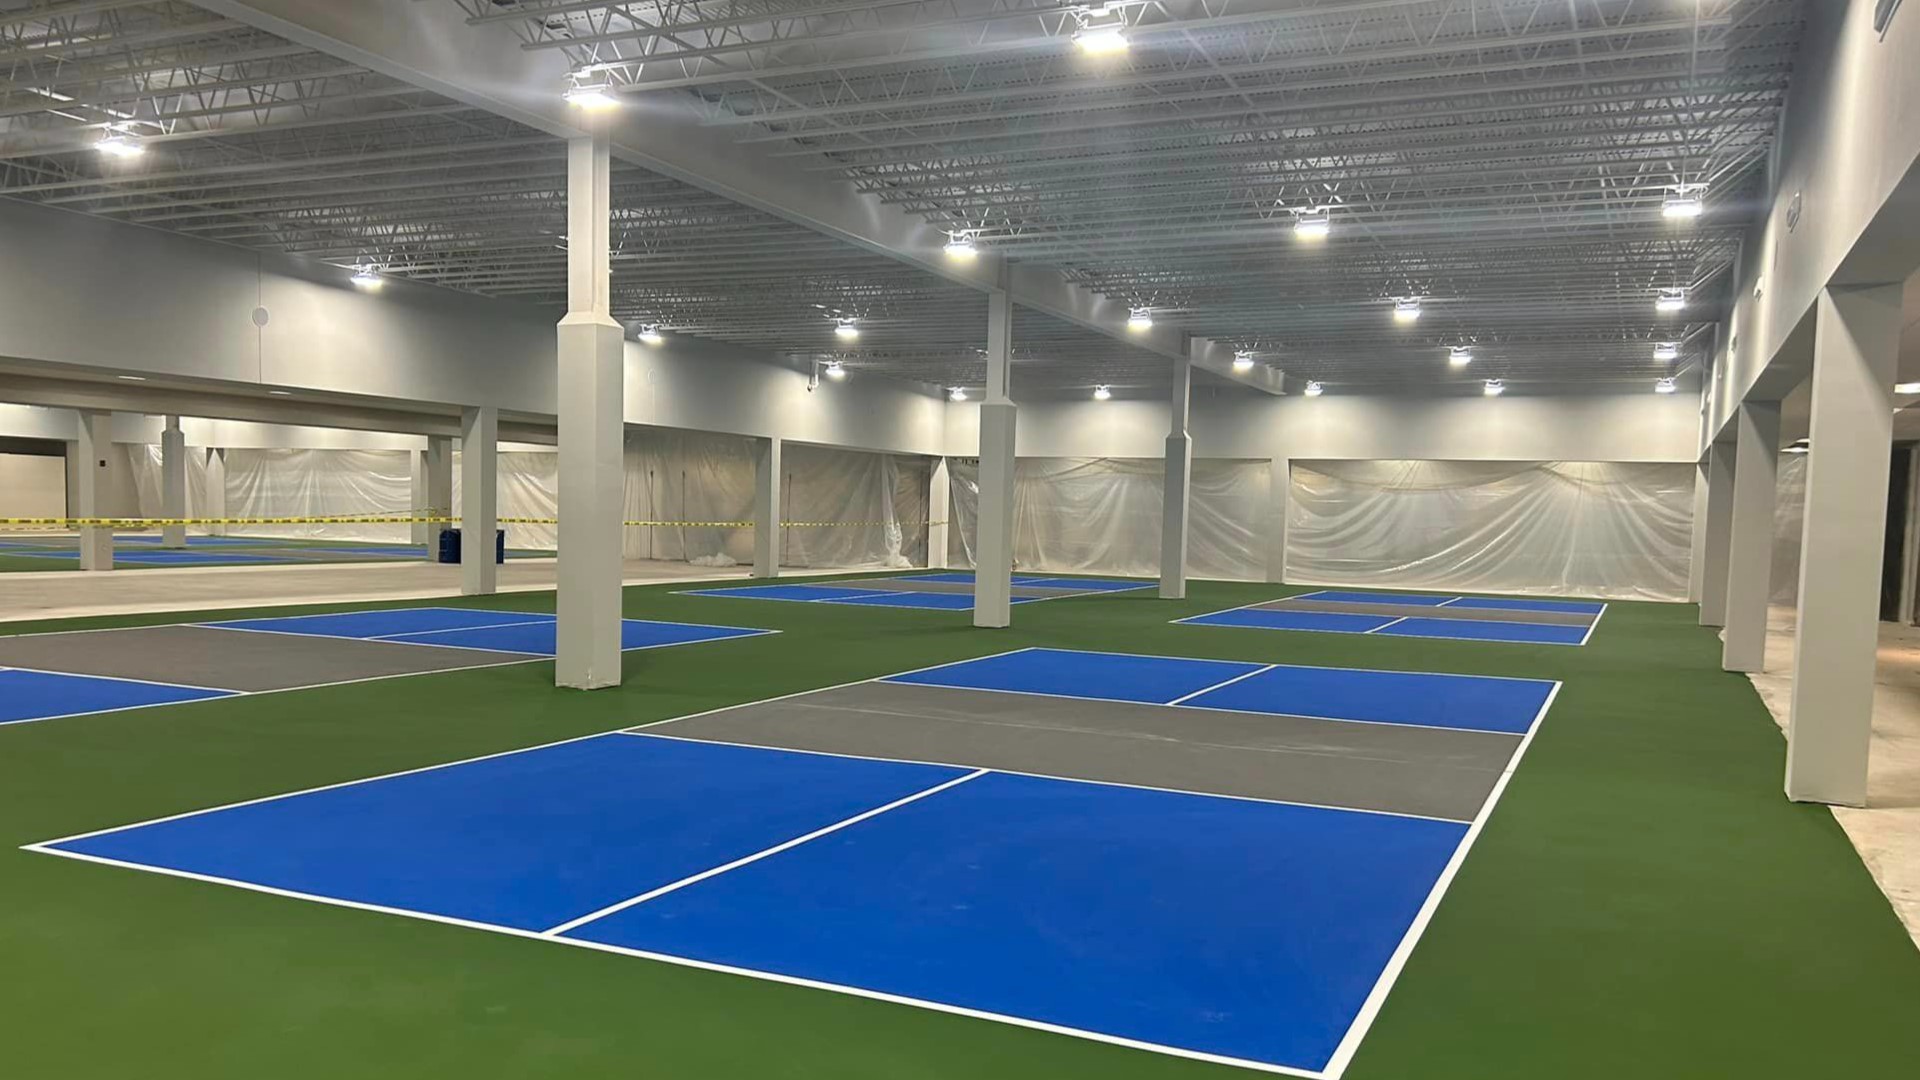 Folks there say they had a great time trying out the courts and are excited for the facility to be open to the public.